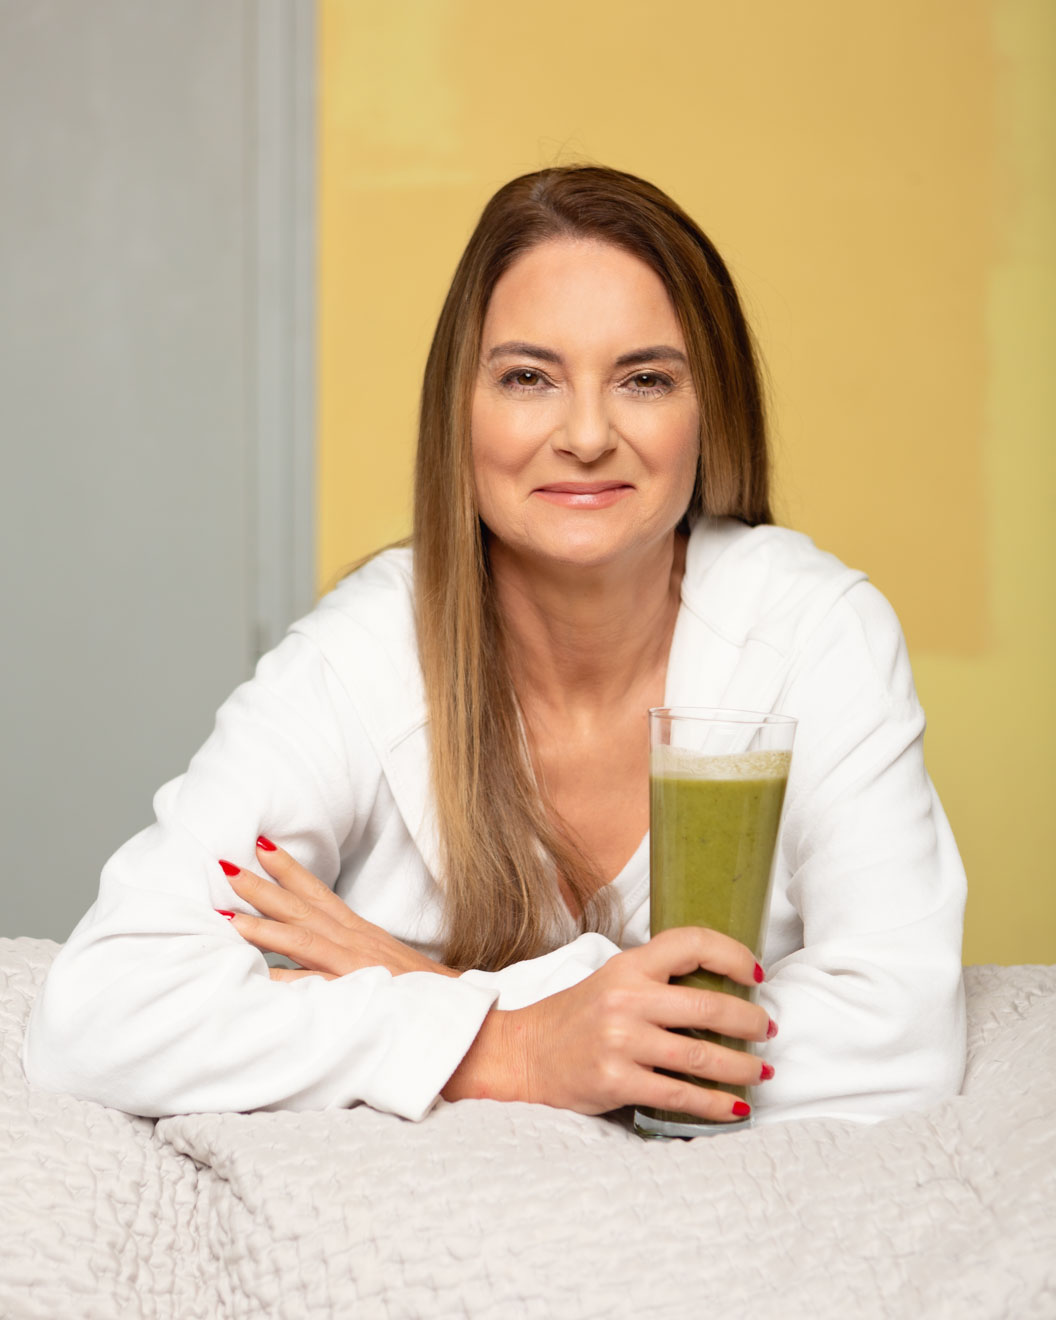 Photograph of a woman smiling in a white bath robe holding a green smoothie